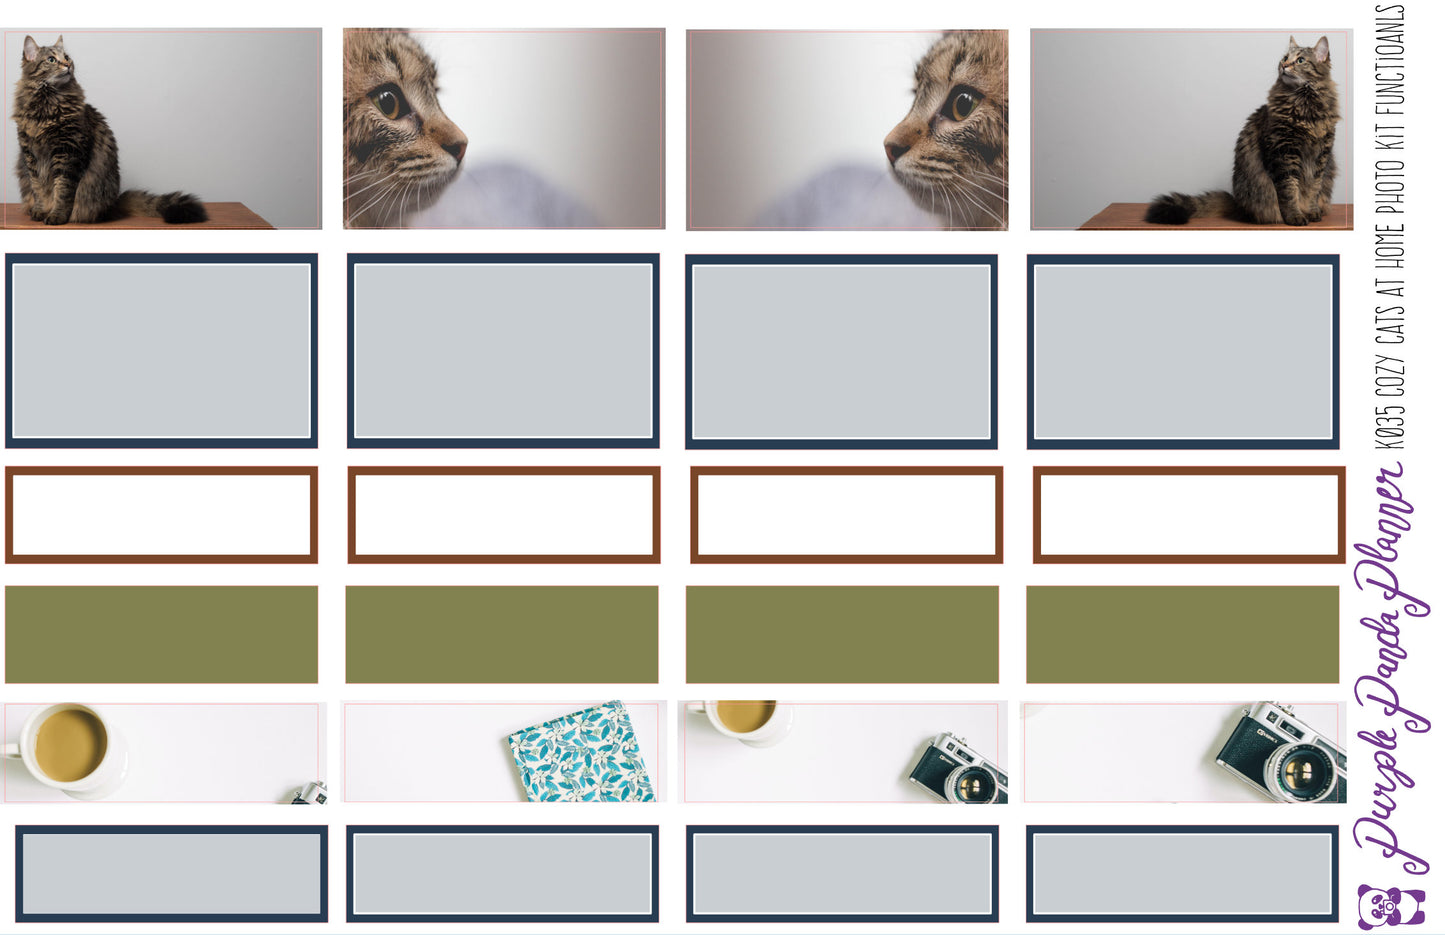 Cozy Cats at Home Photo Kit for Planner or Bullet Journal, Functional Stickers (K033)